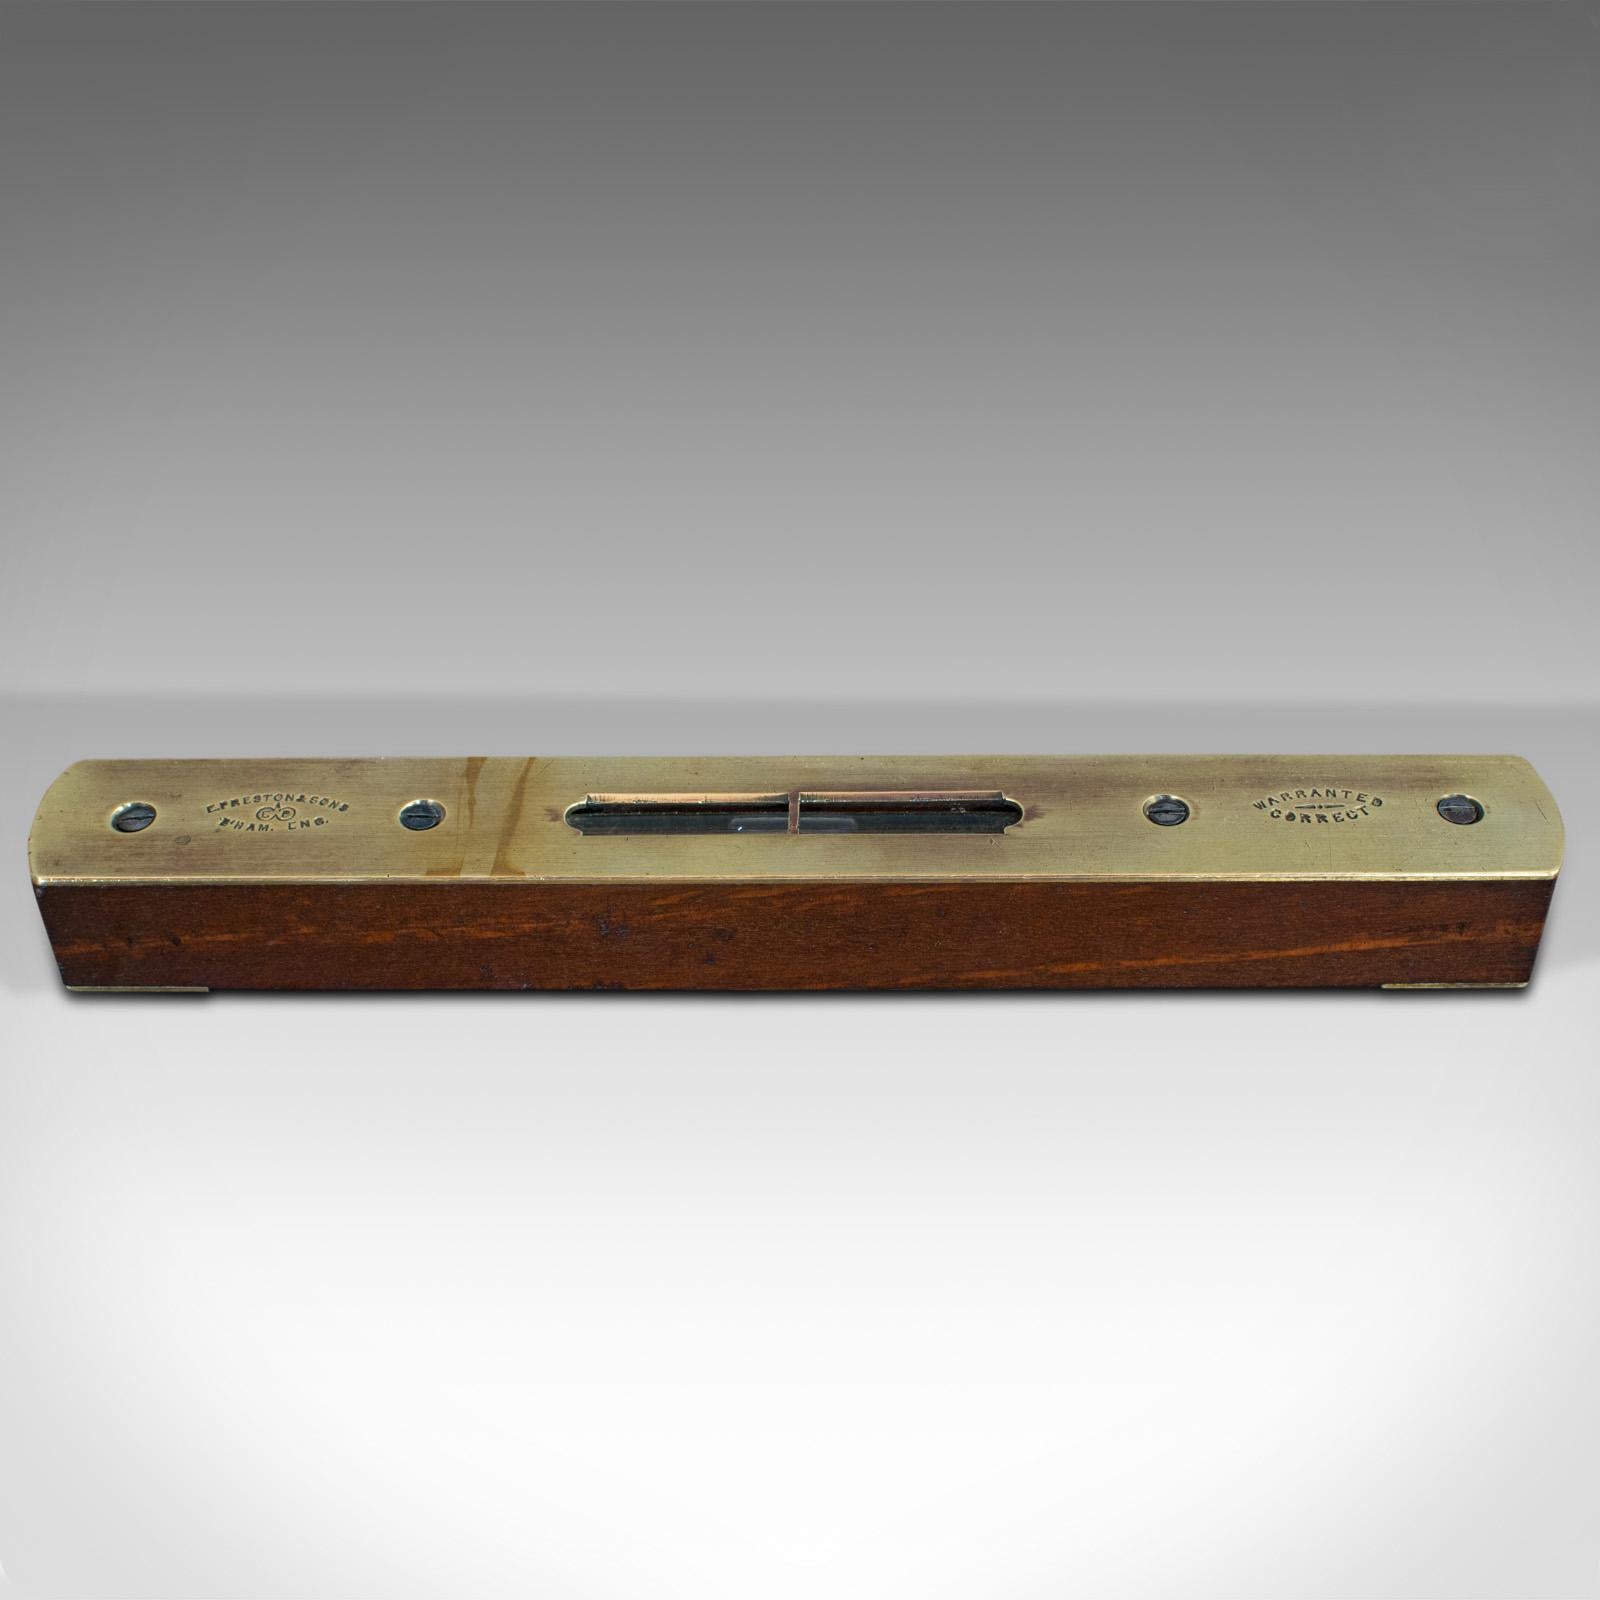 This is a vintage spirit level. An English, walnut and brass instrument by Preston and Sons, dating to the mid-20th century, circa 1930.

Attractive craftsman's level
Displays a desirable aged patina
Body in walnut shows rich russet